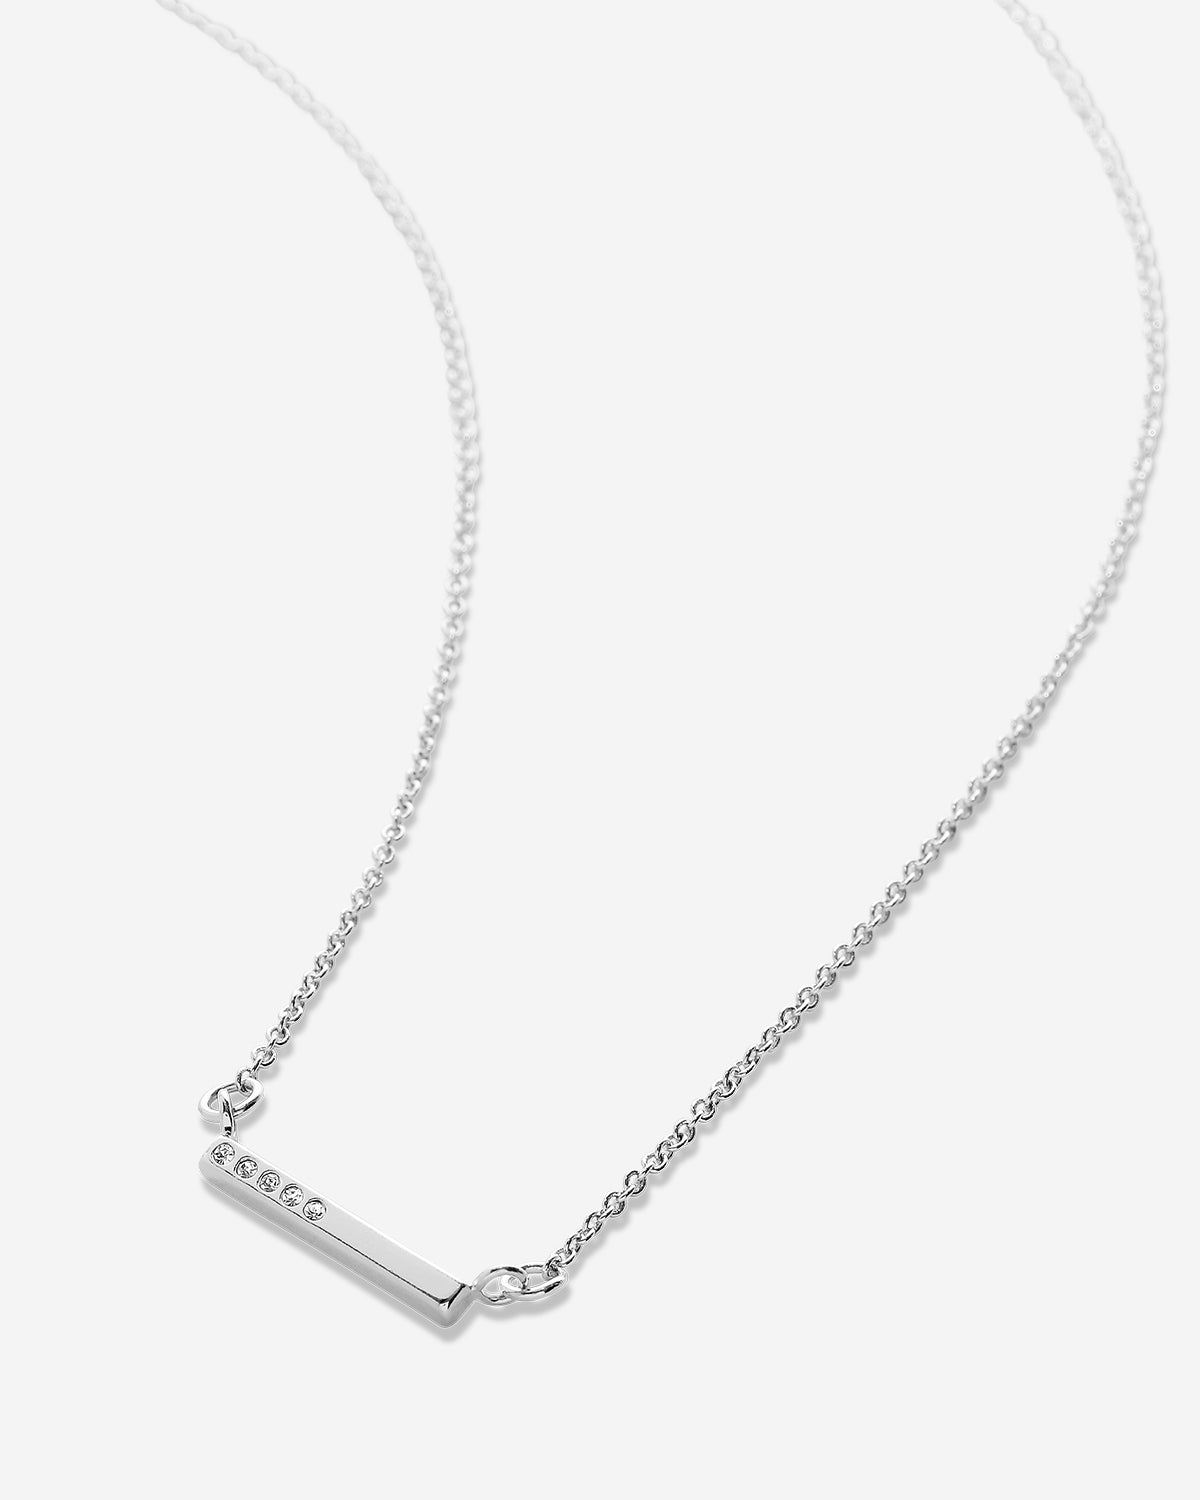 Bryan Anthonys Blank Slate Necklace in Silver